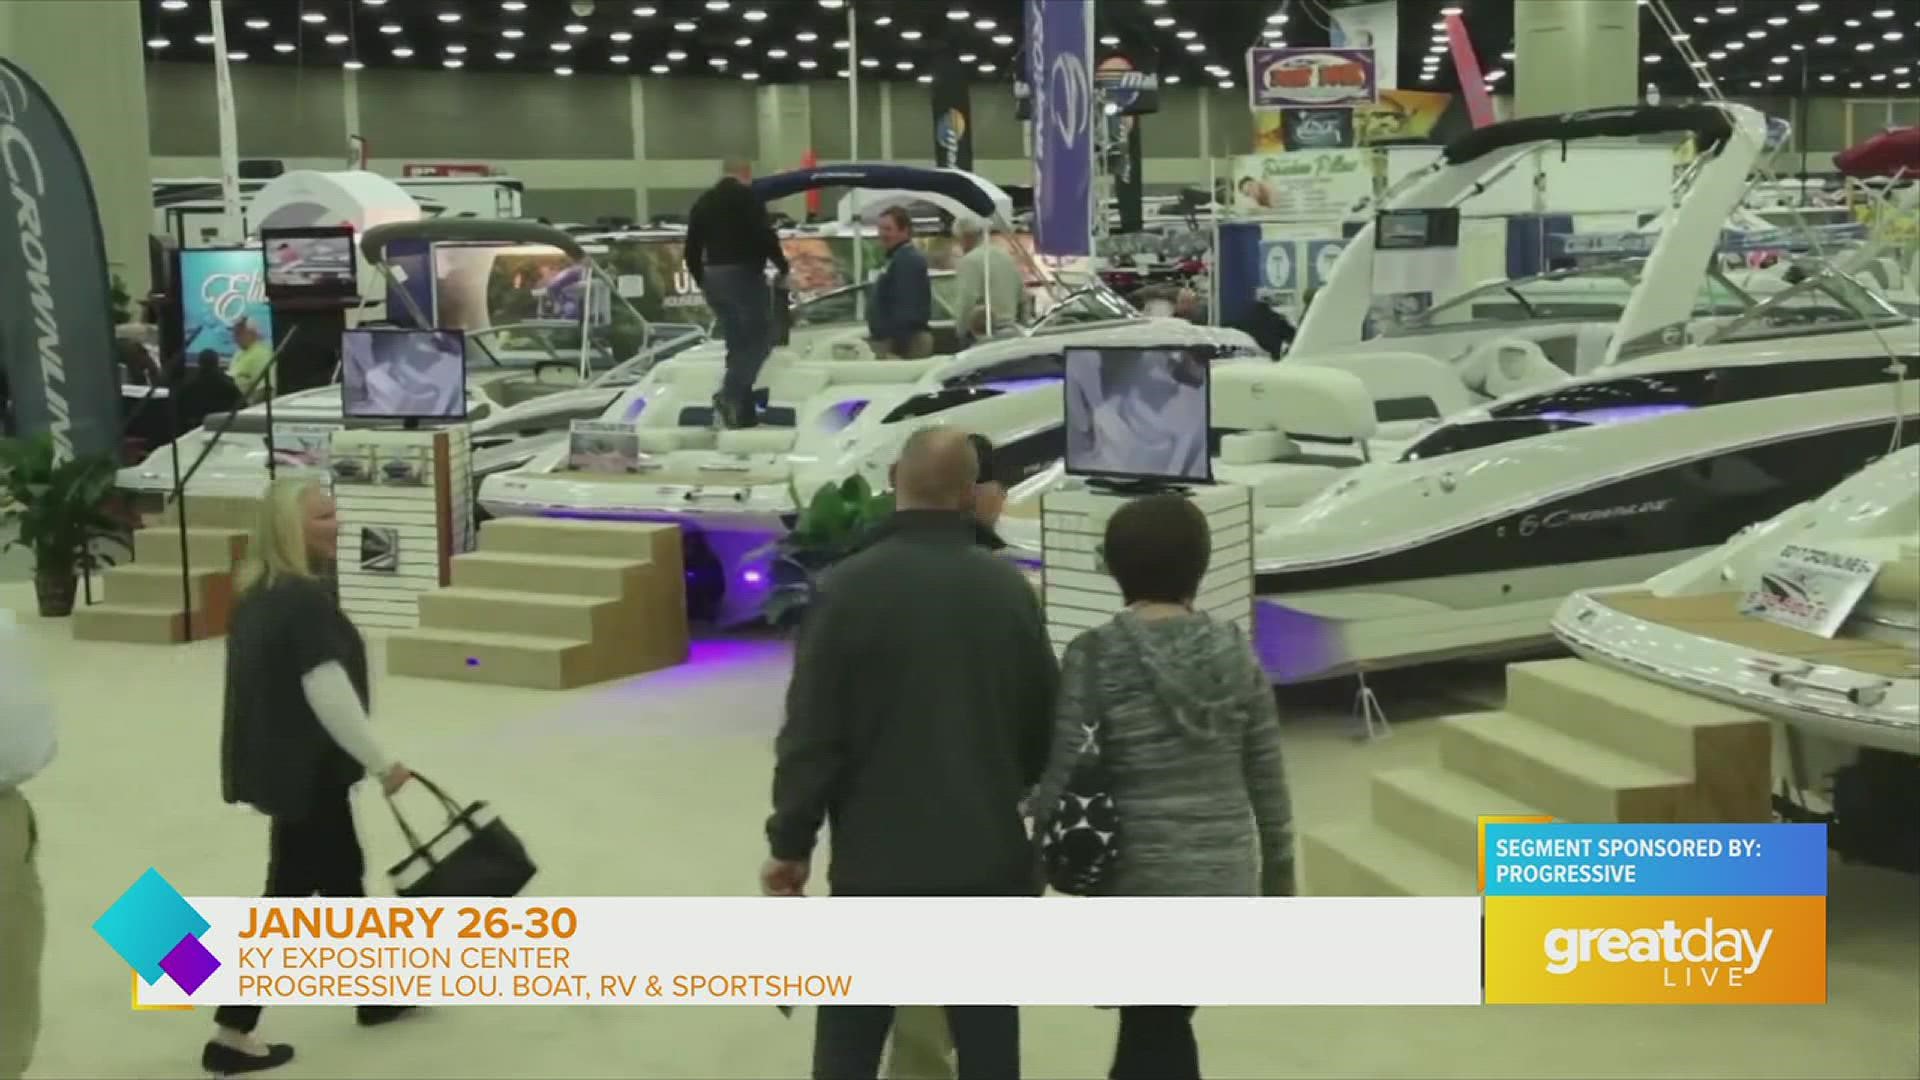 The Progressive Louisville Boat, RV & Sportshow Presented by Discover Boating runs through Jan. 30 at the KY Expor Center. Visit LouisvilleBoatShow.com for details.